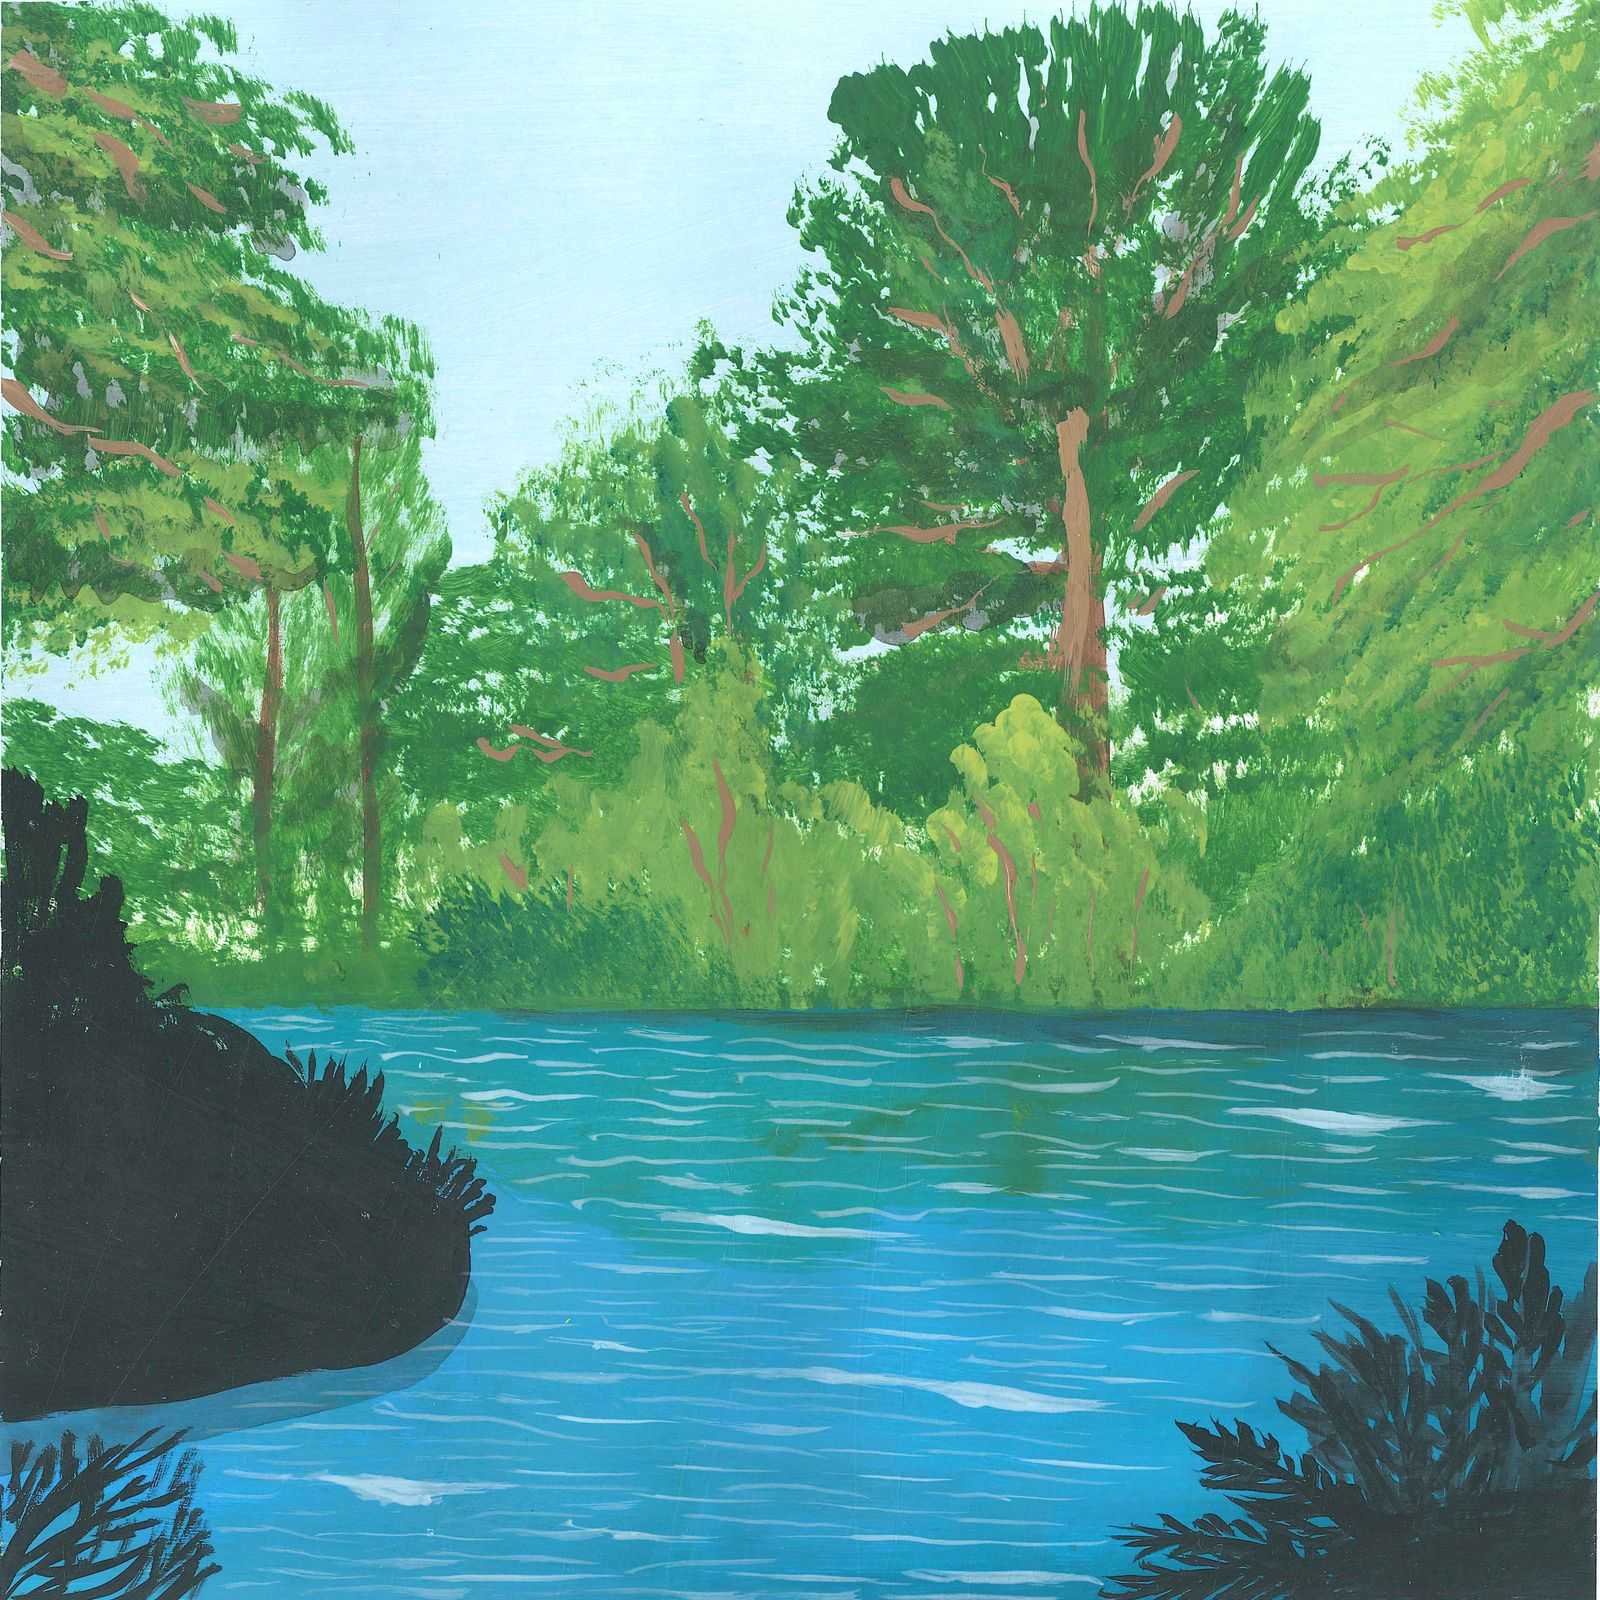 Stream in the Summer Mediterranean Forest - nature landscape painting - earth.fm